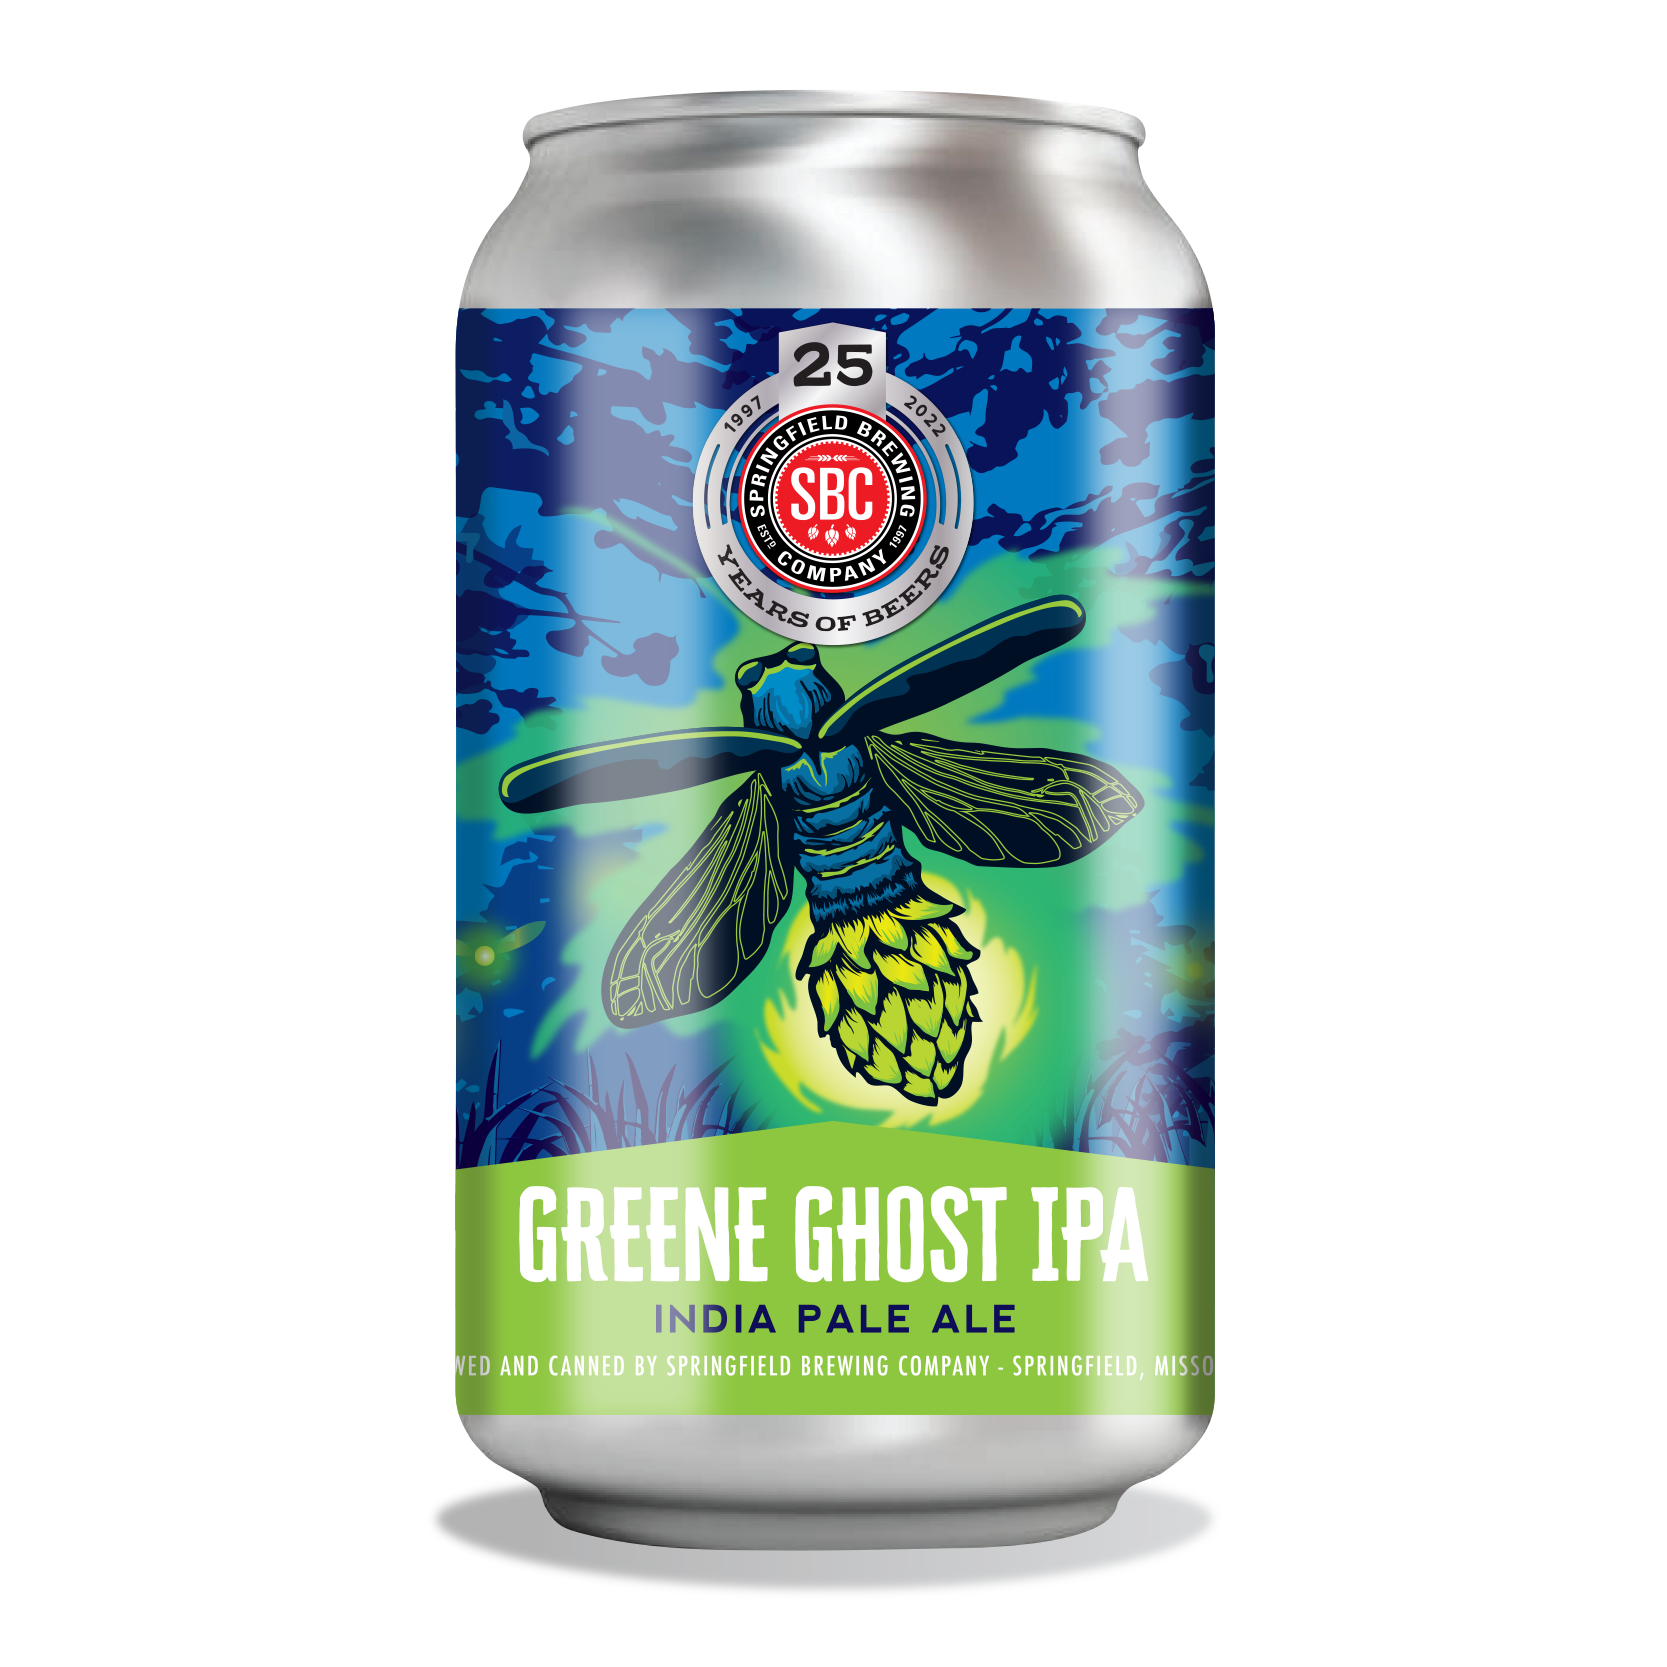 https://brewery.springfieldbrewingco.com/wp-content/uploads/2022/01/25thGreeneGhost_CanWebsite.png